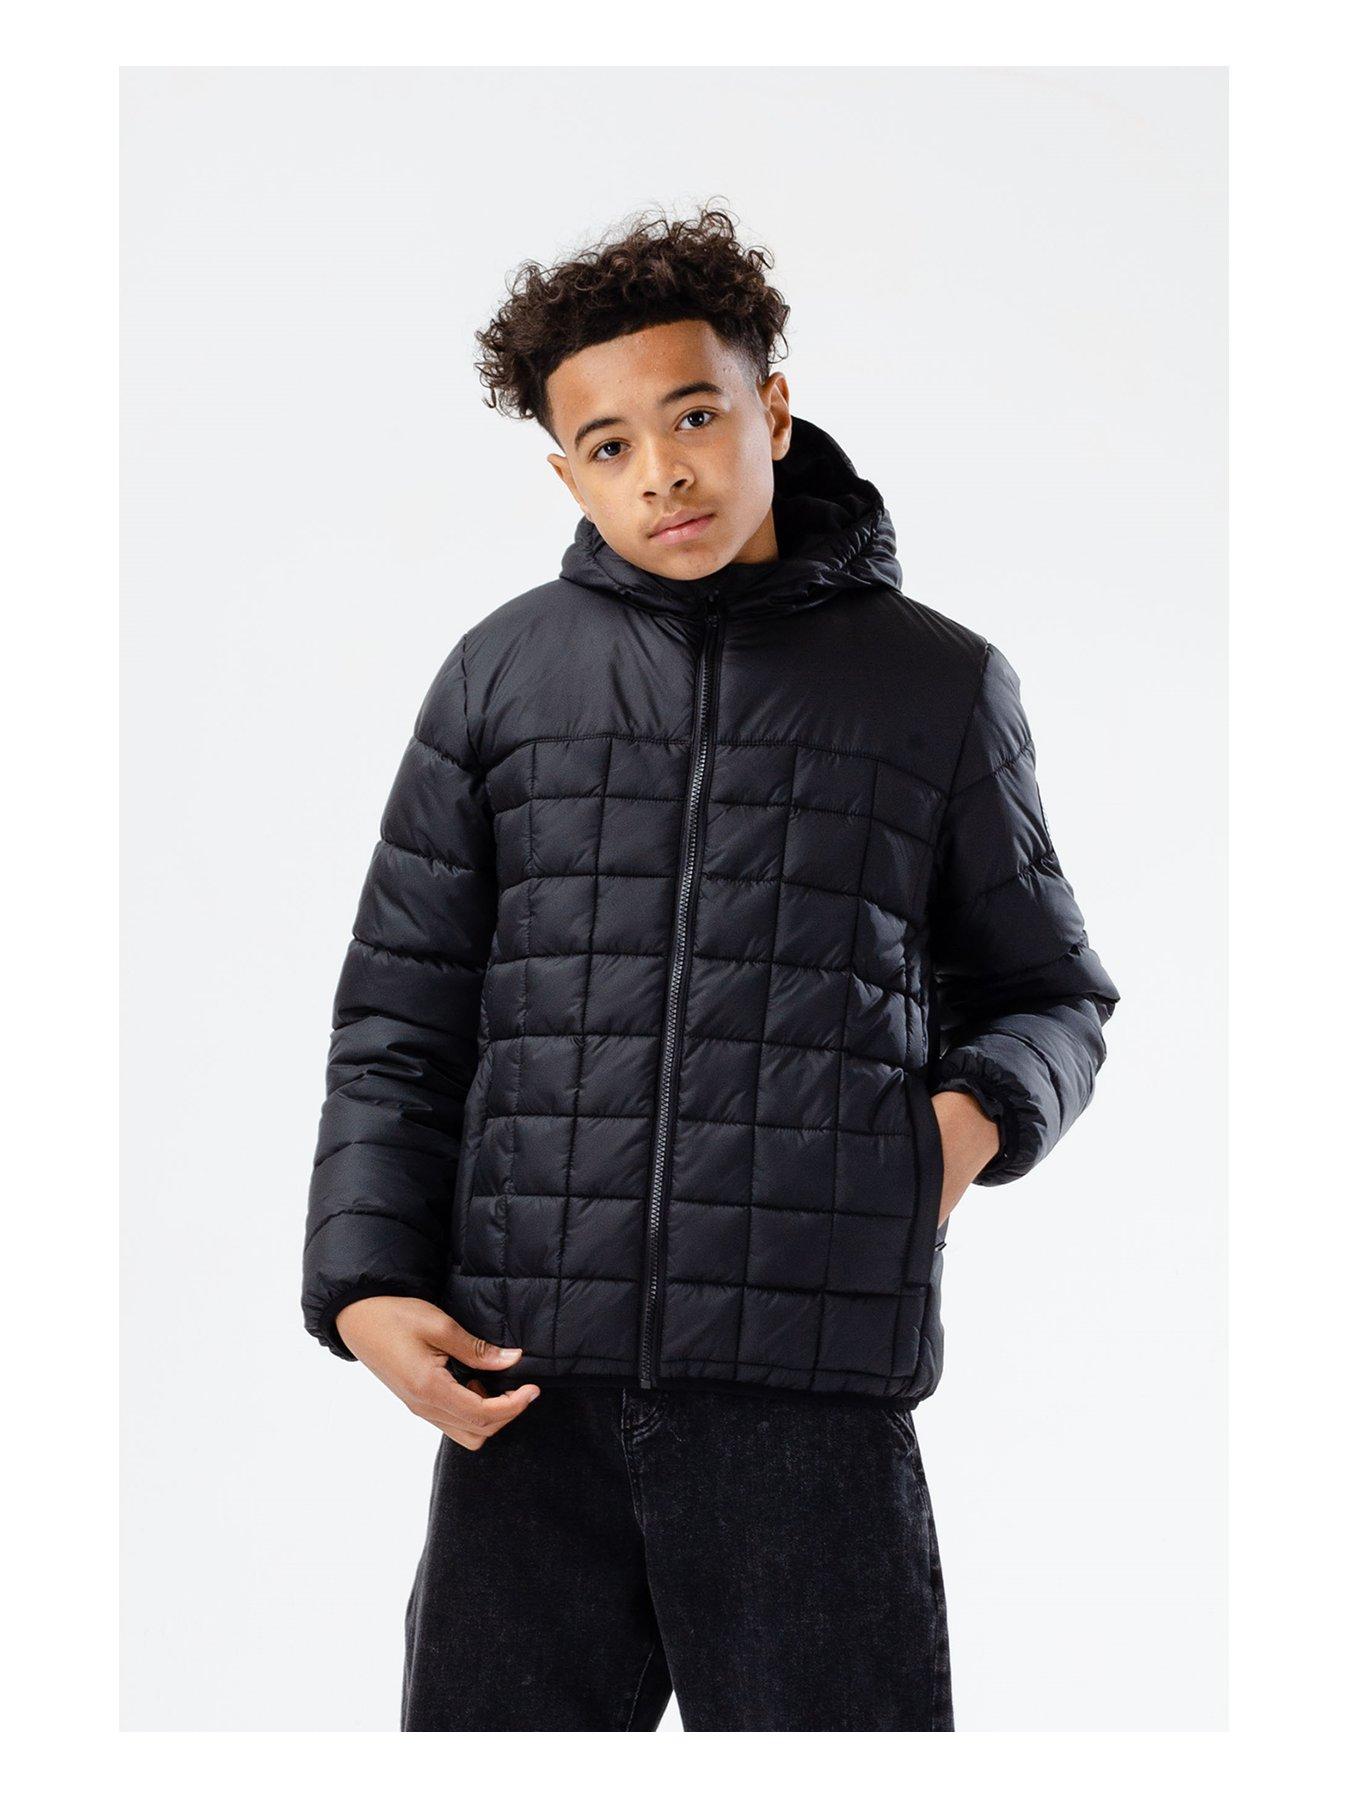 Hype Boys Fab Hype Navy Thick Padded Parka Jacket Age 15 Yrs RRP: £69 Machine Wash 